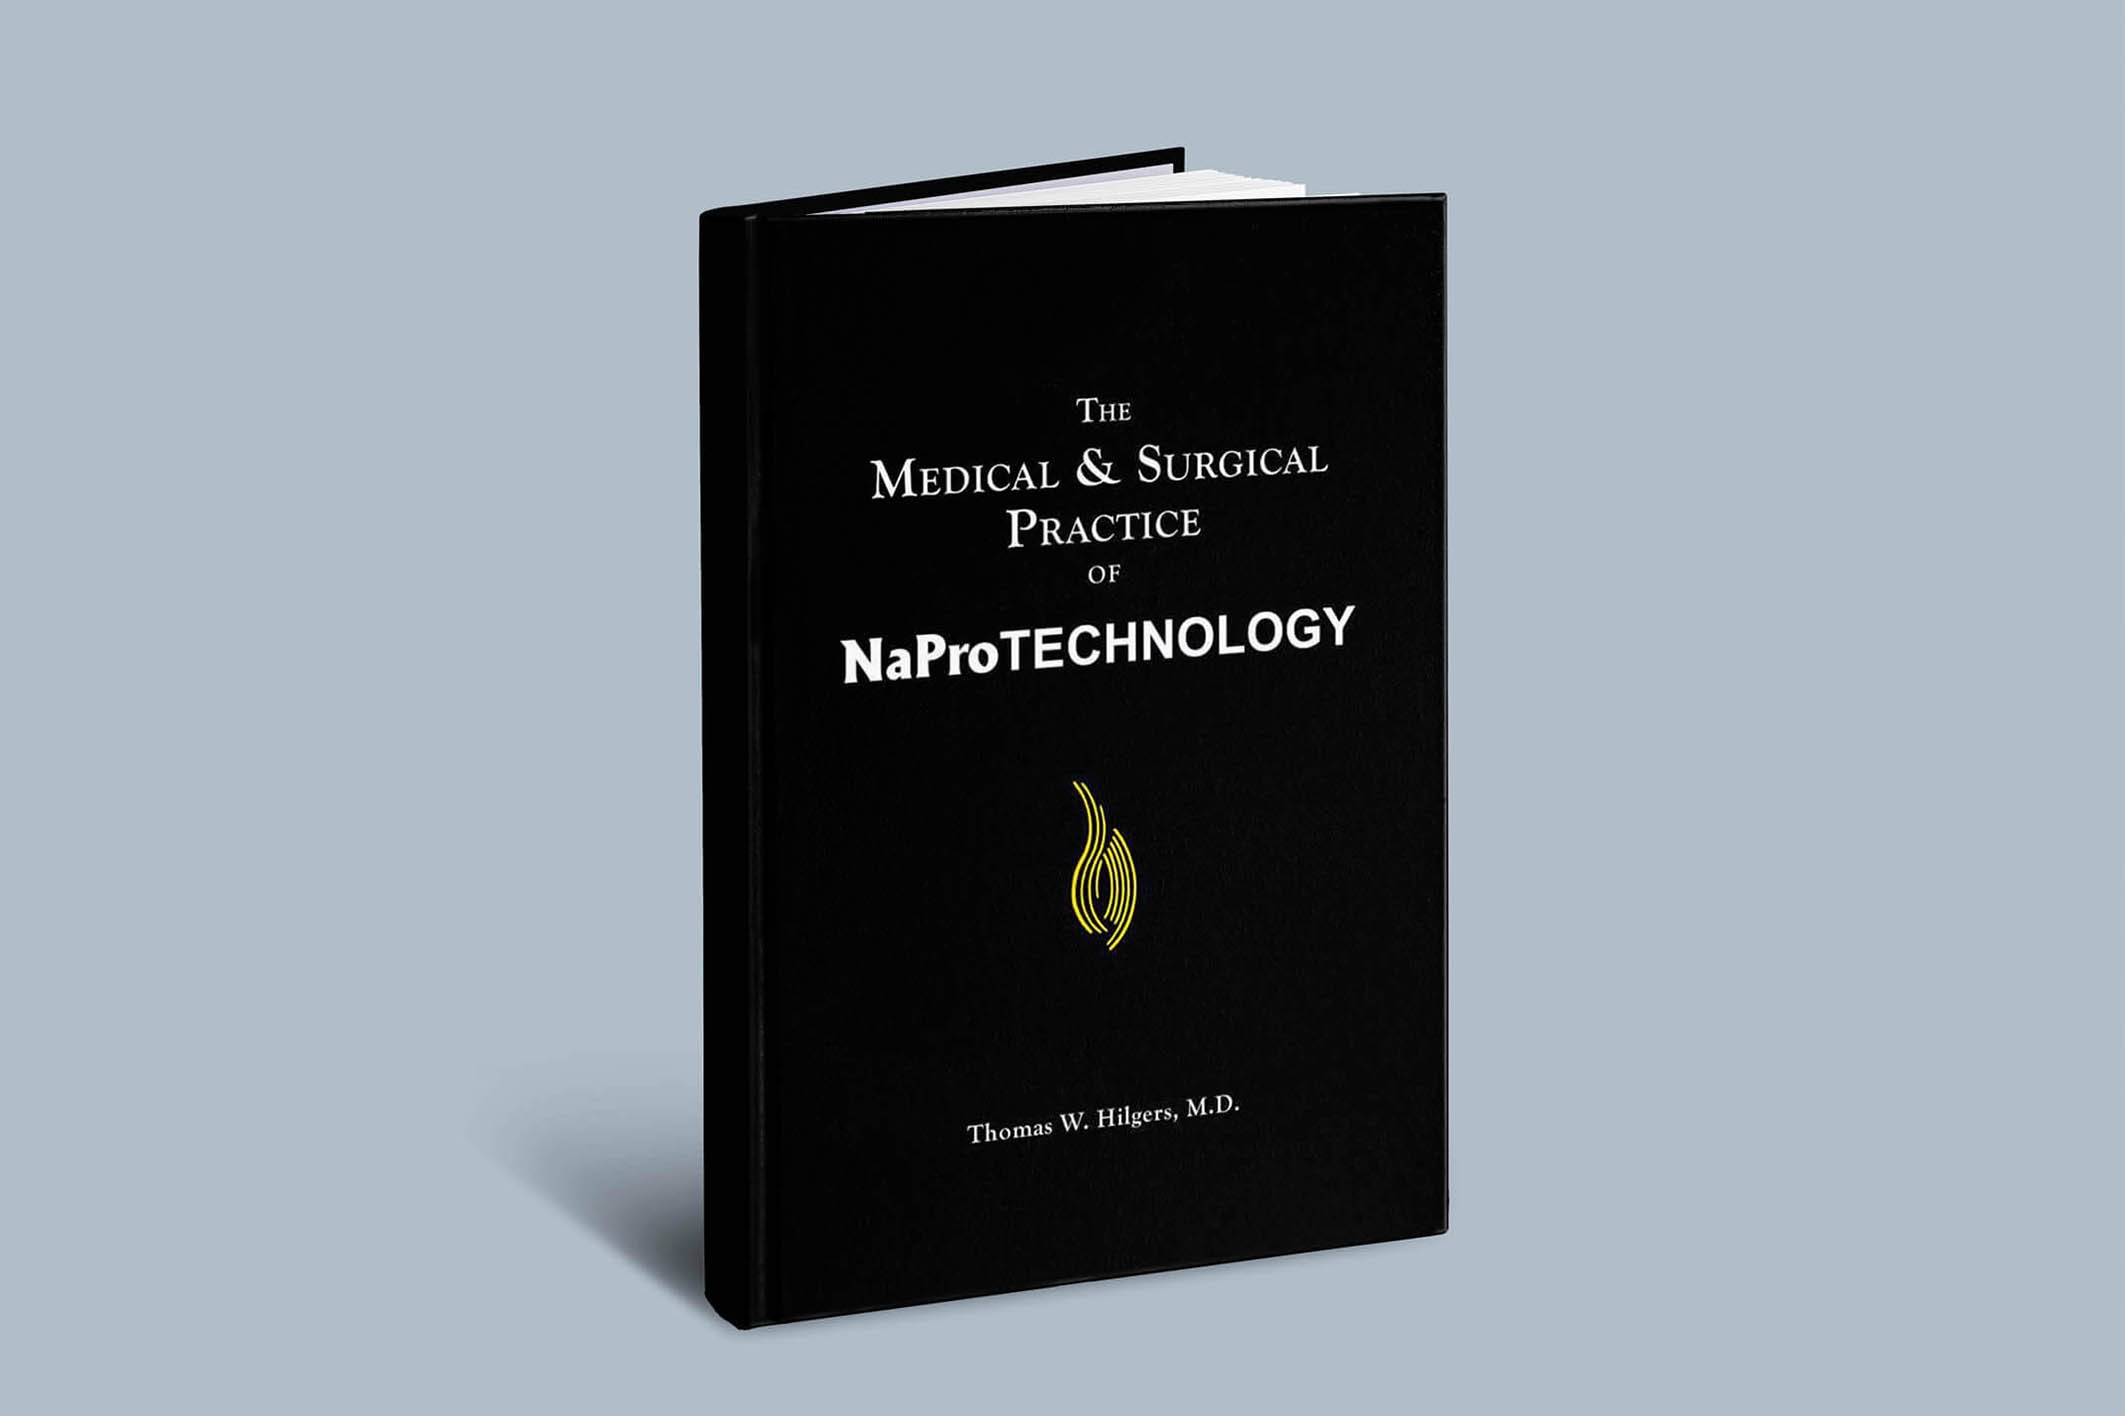 the Medical & Surgical Practice of NaProTECHNOLOGY